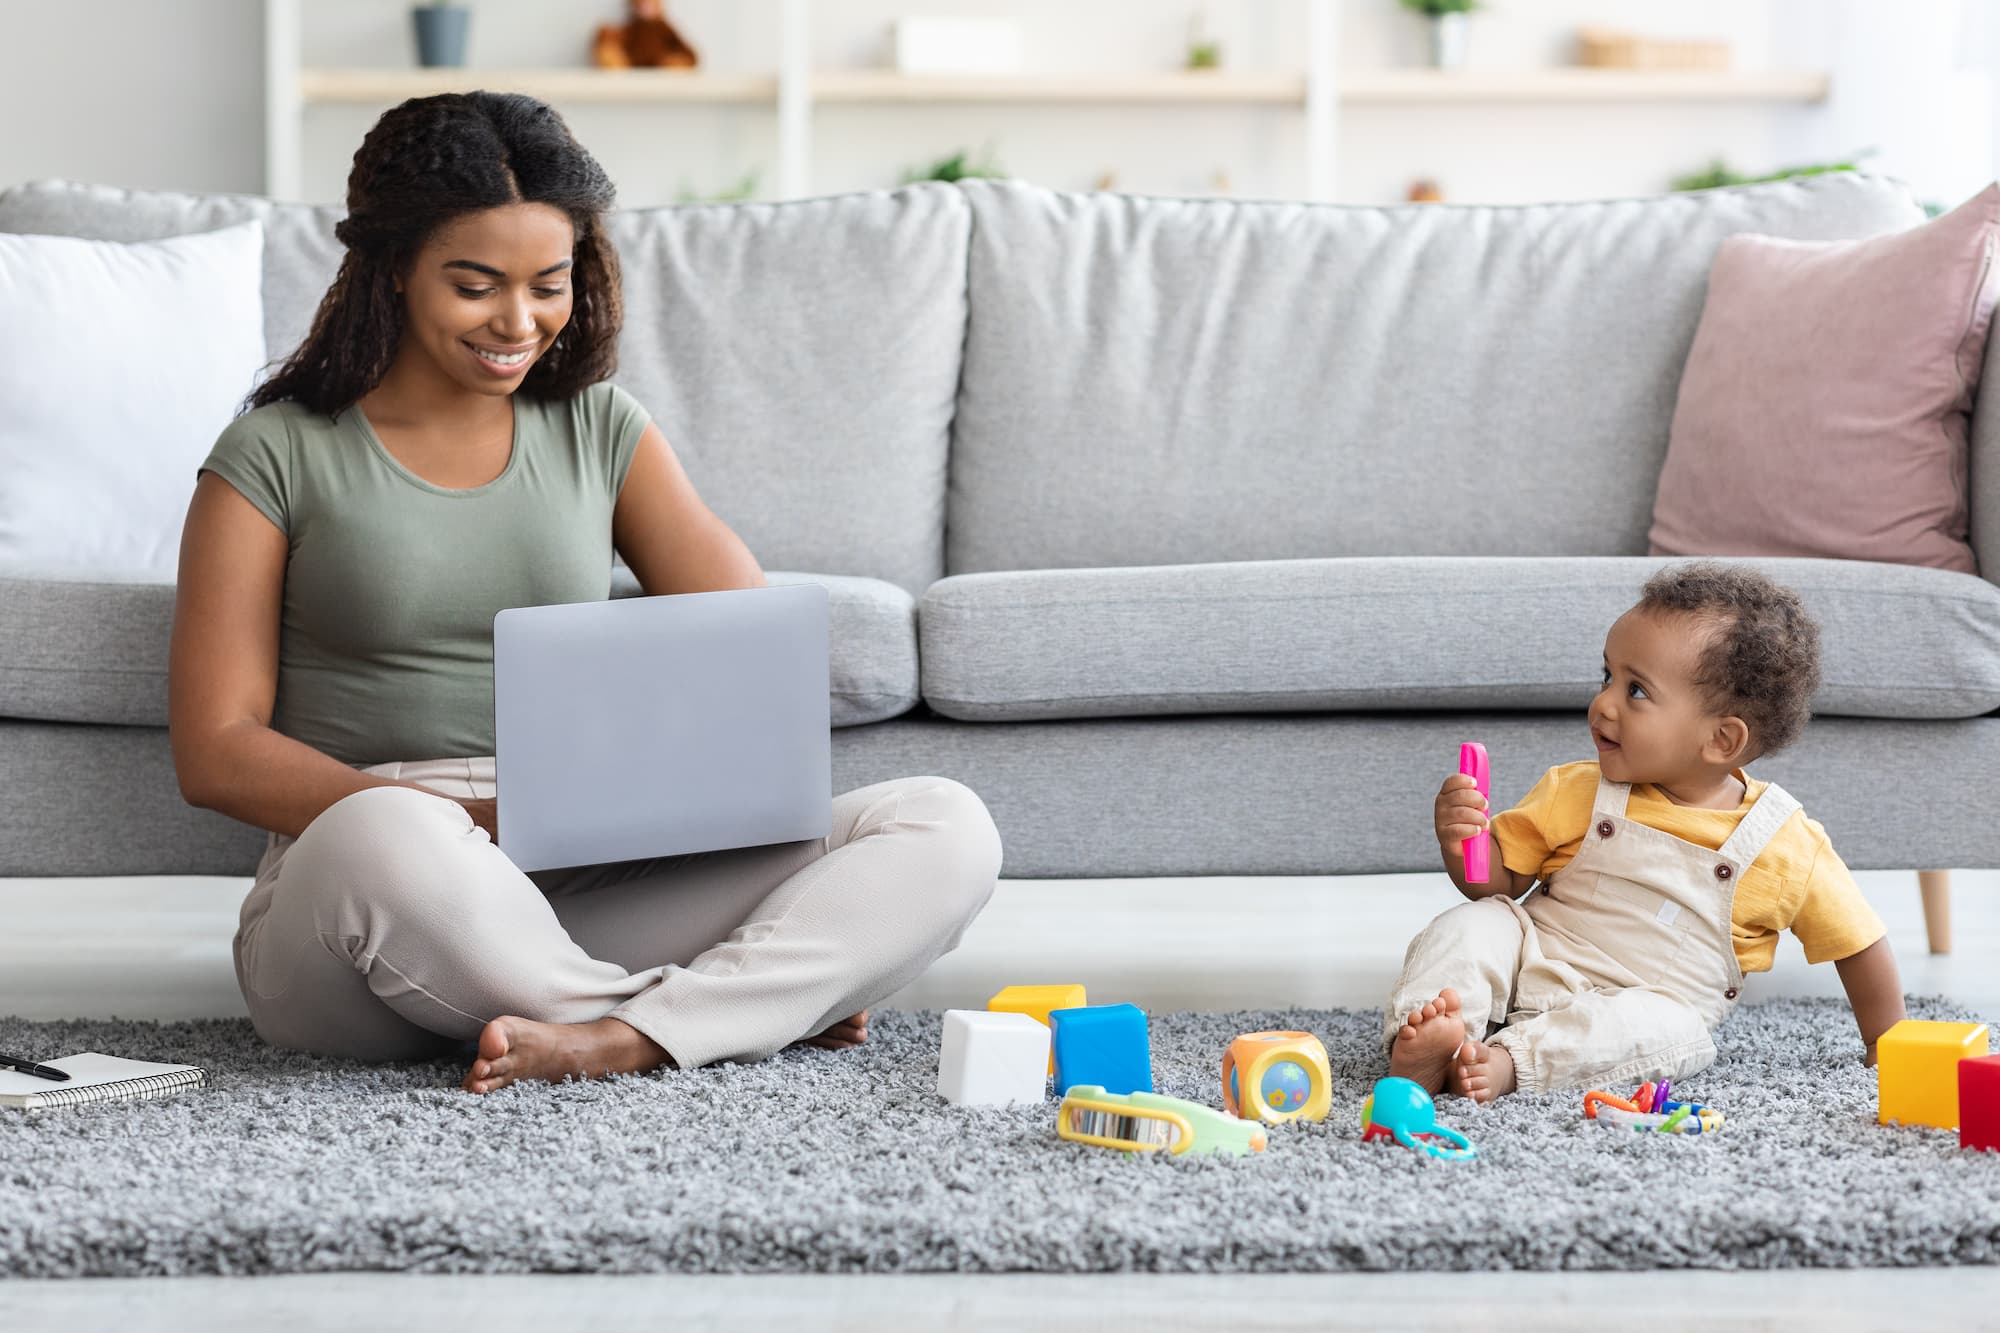 How working from home can make you closer with your kids